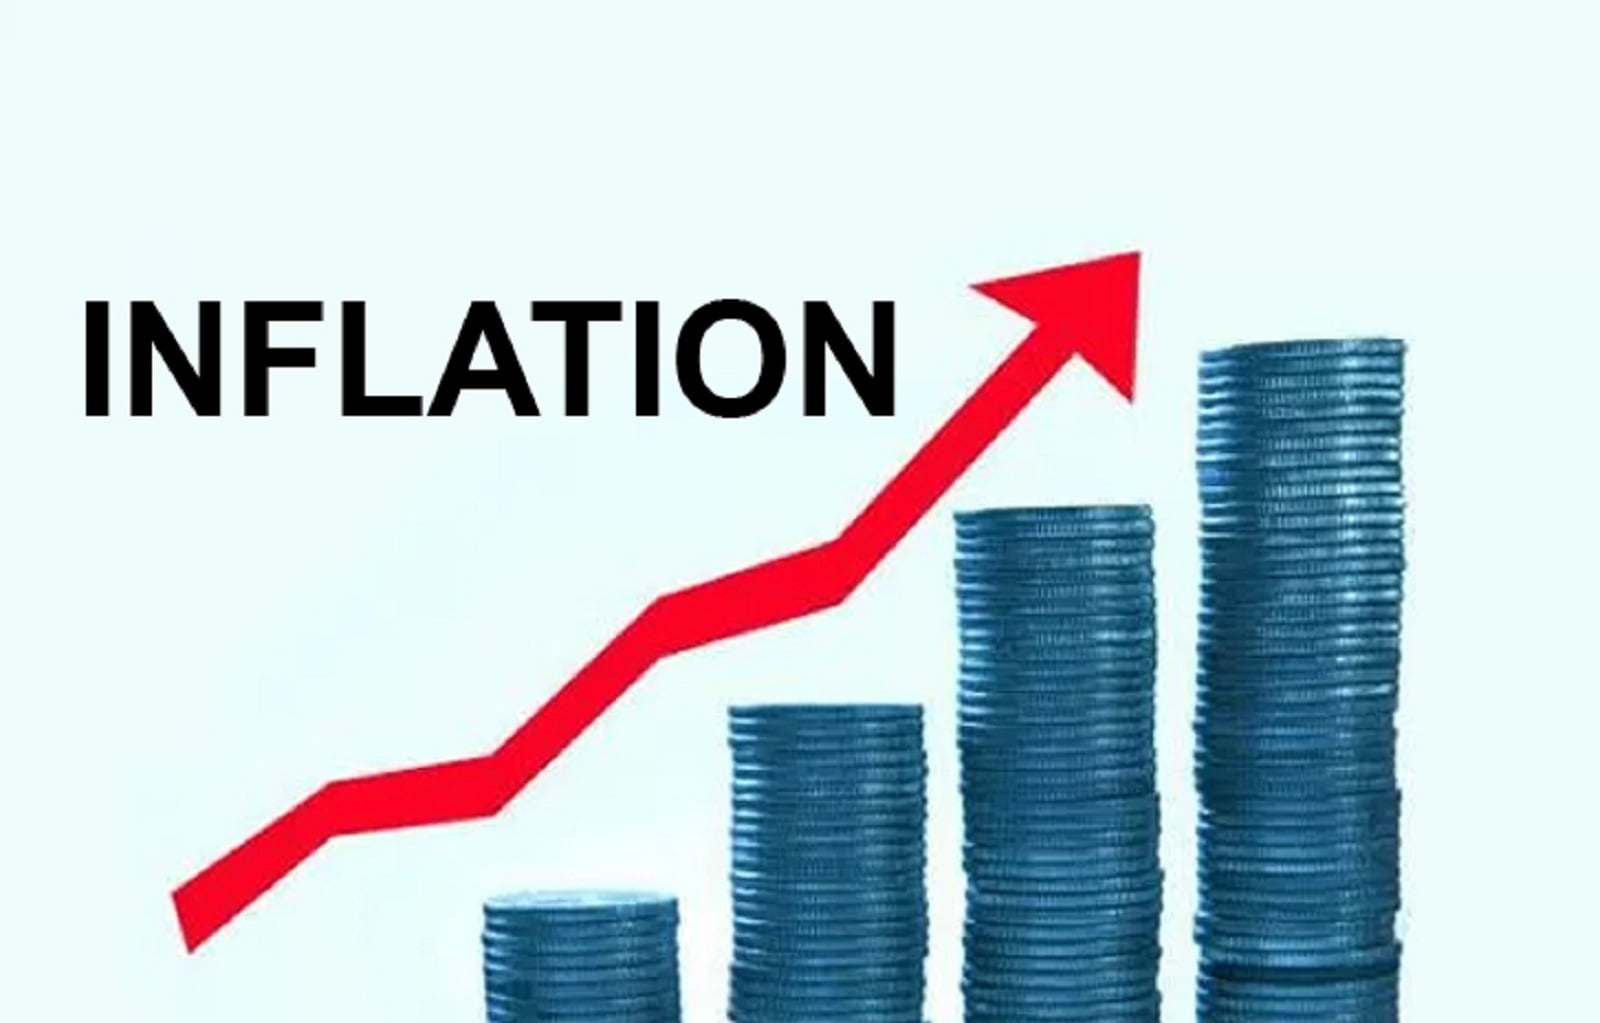 CBN Is Reluctant - Experts Lament As Nigeria's Inflation Rate Surges